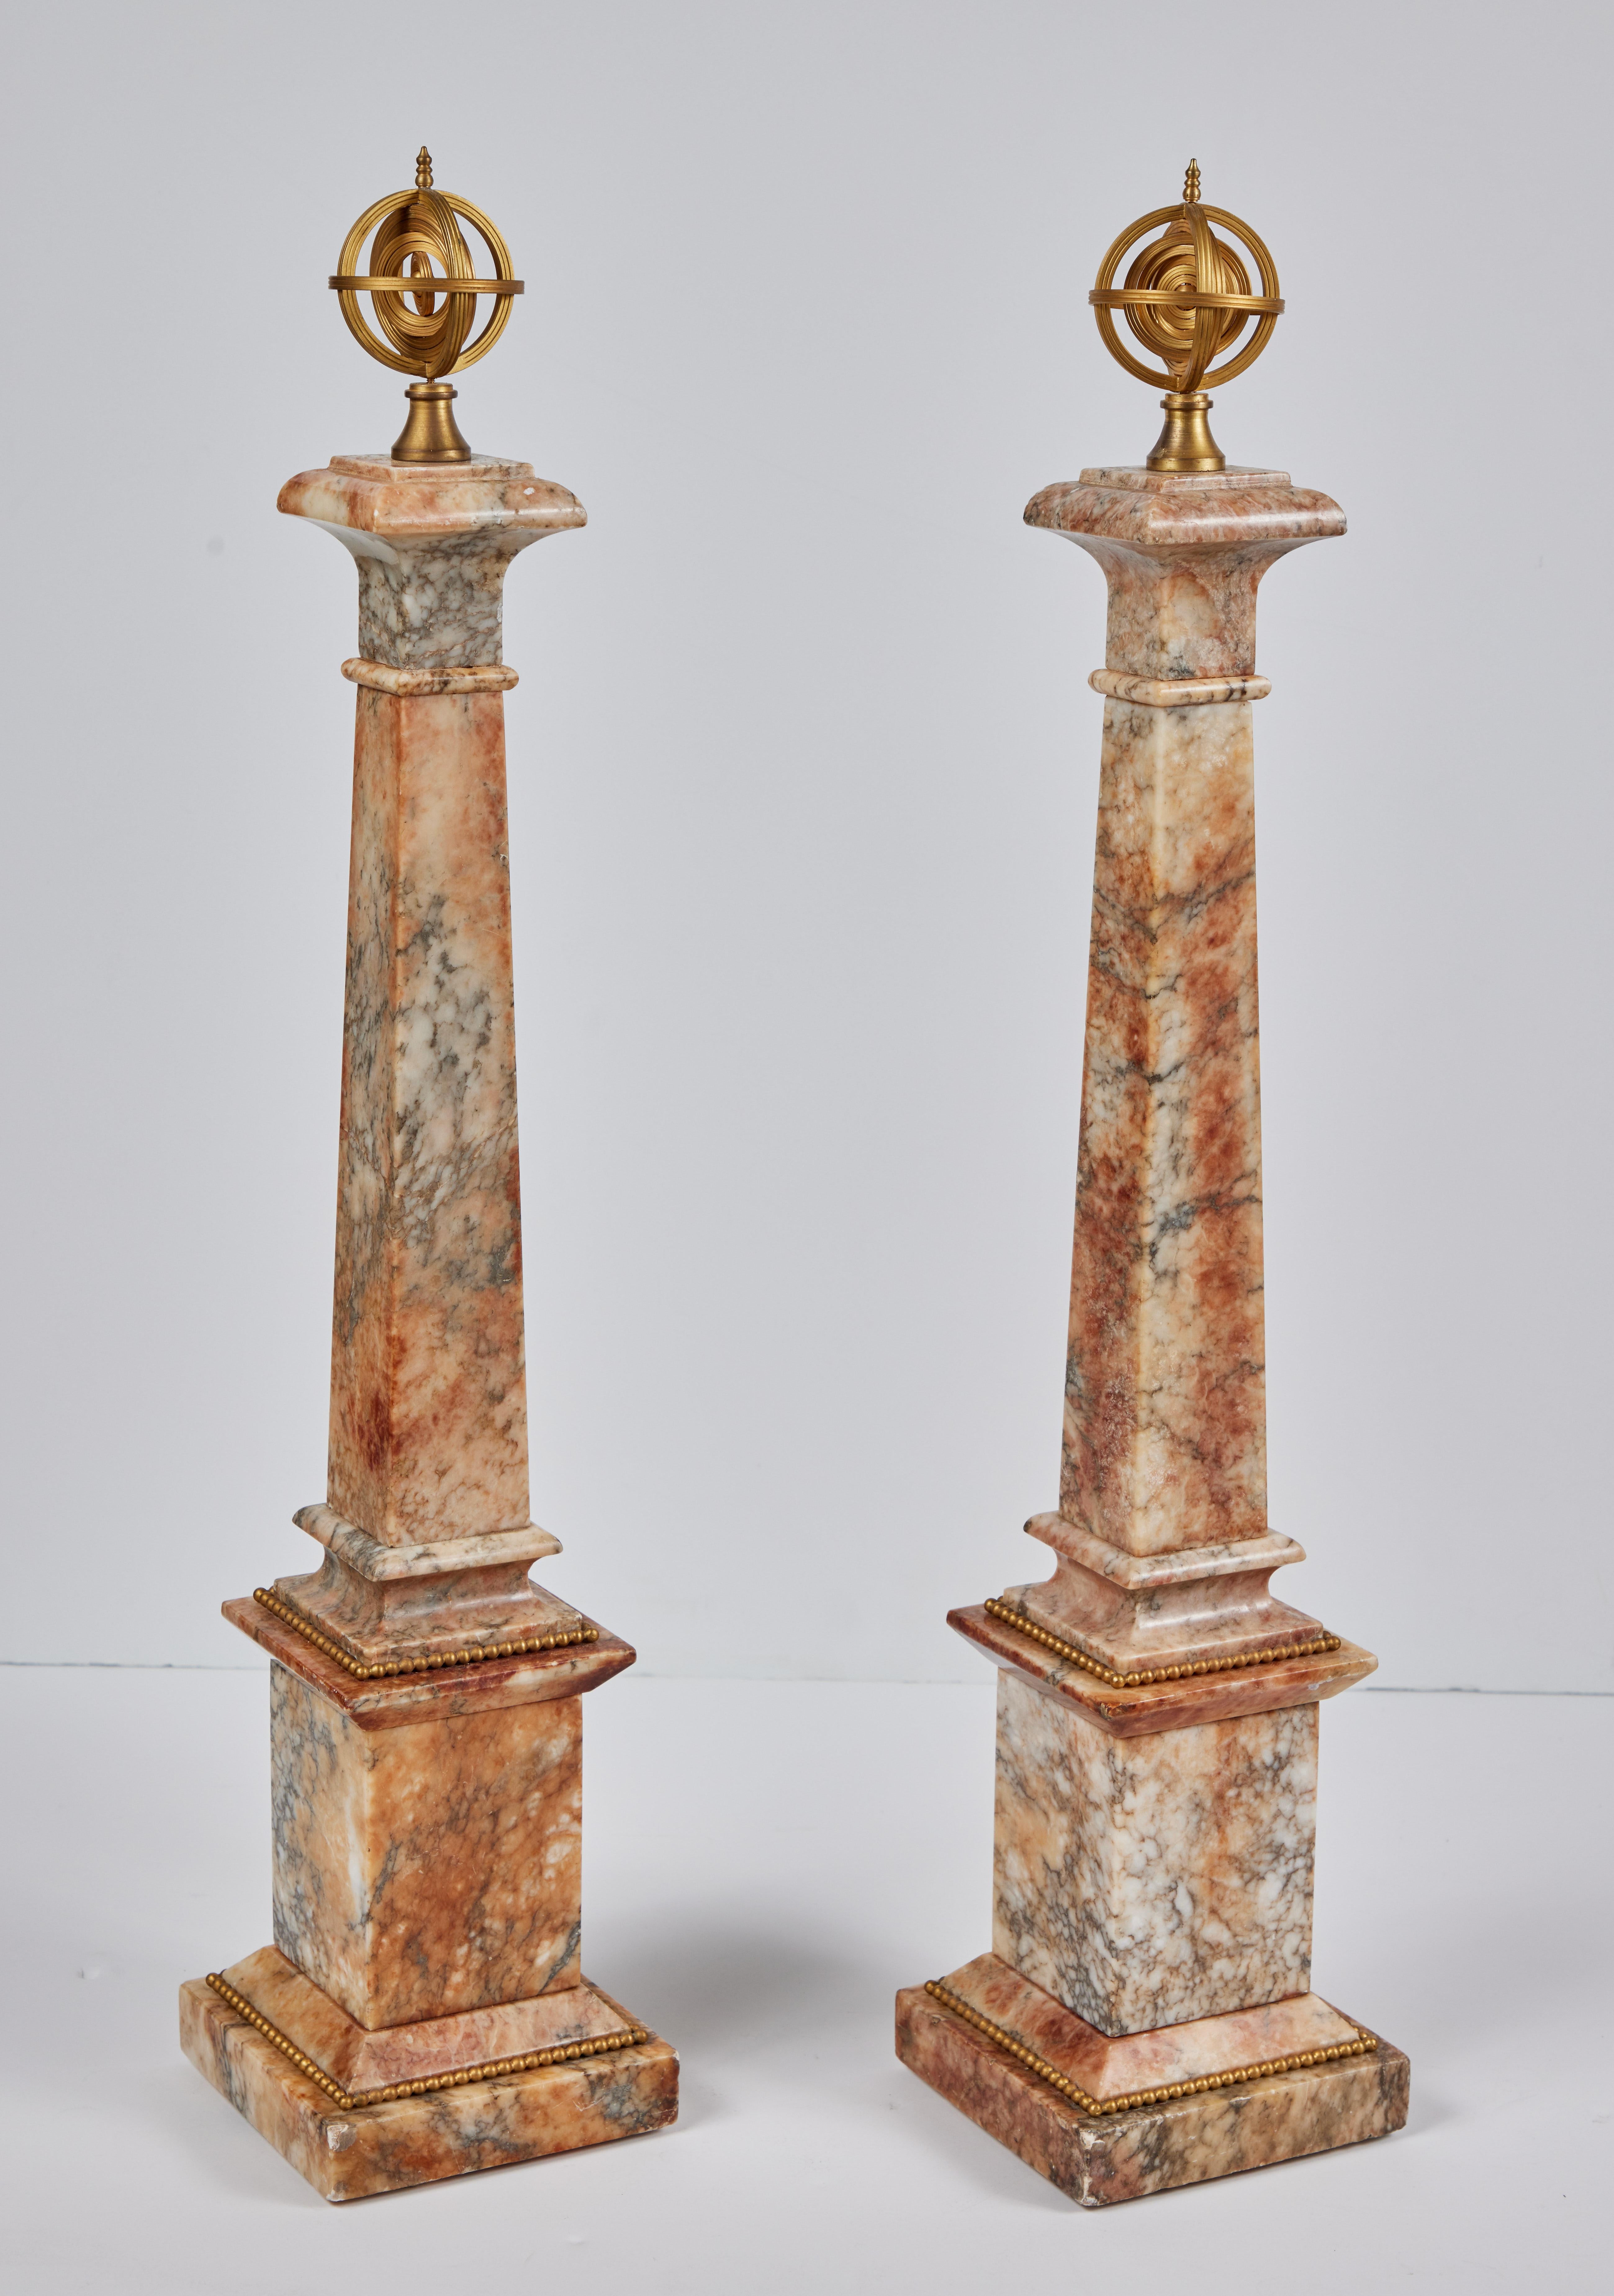 A pair of c. 1850, hand-carved, polished marble obelisks surmounted by gilt bronze armillary spheres. Each on raised bases embellished with strings of gilt bronze, pearl-form mounts.